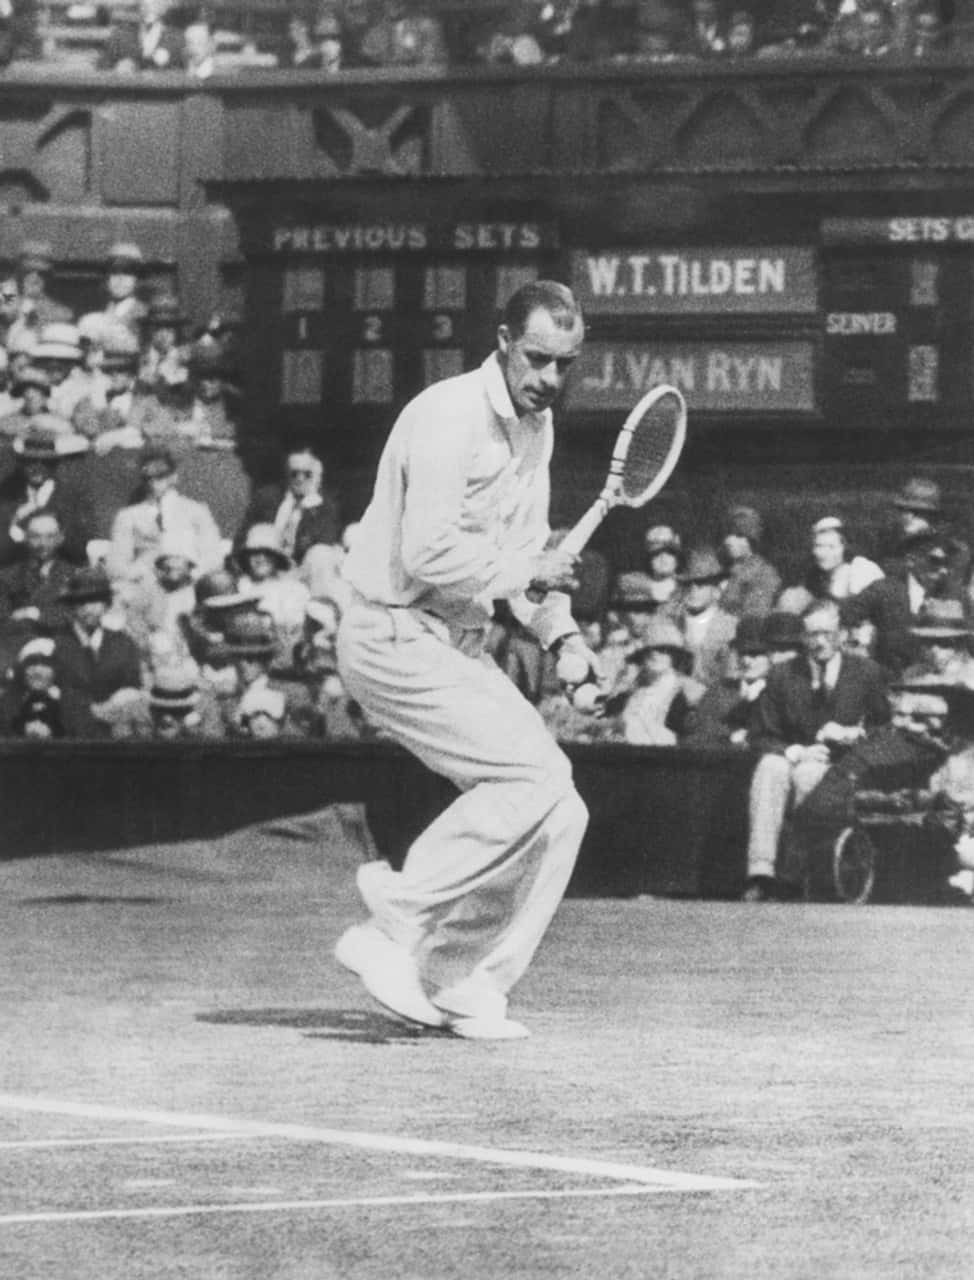 Donbudge Tennis Bill Tilden Could Be Translated Into Italian As 